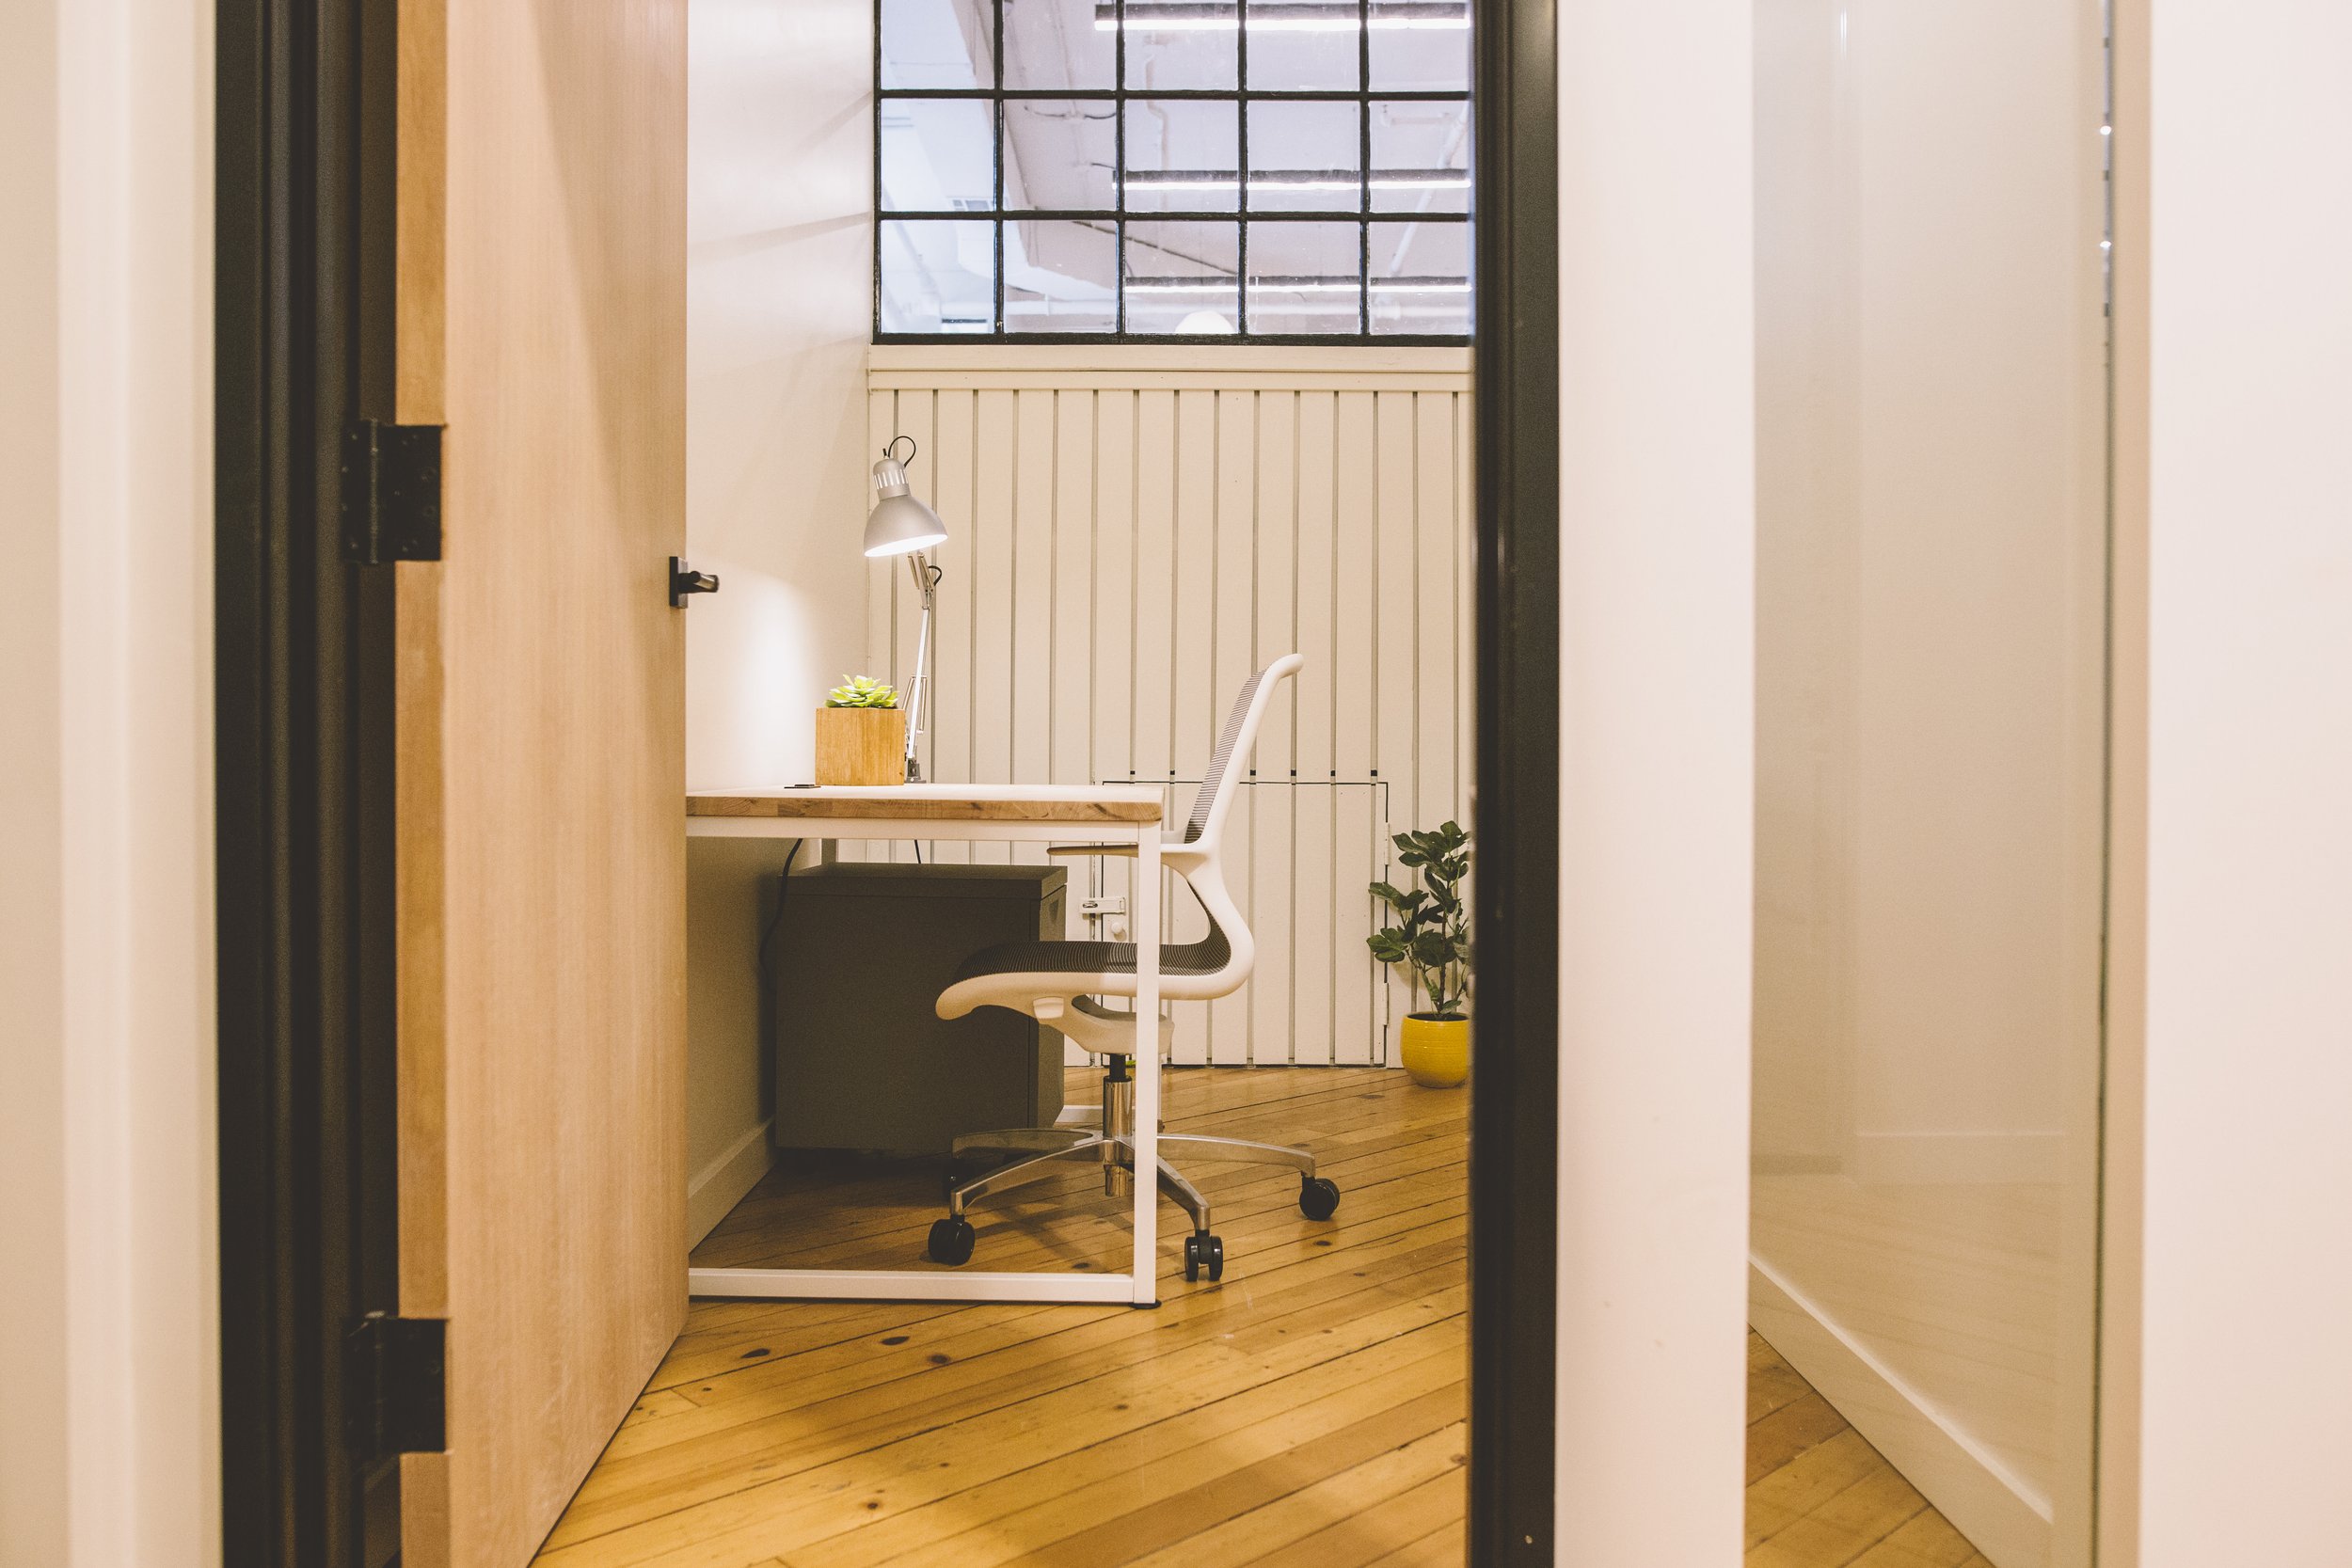  A one-person office in Belltown